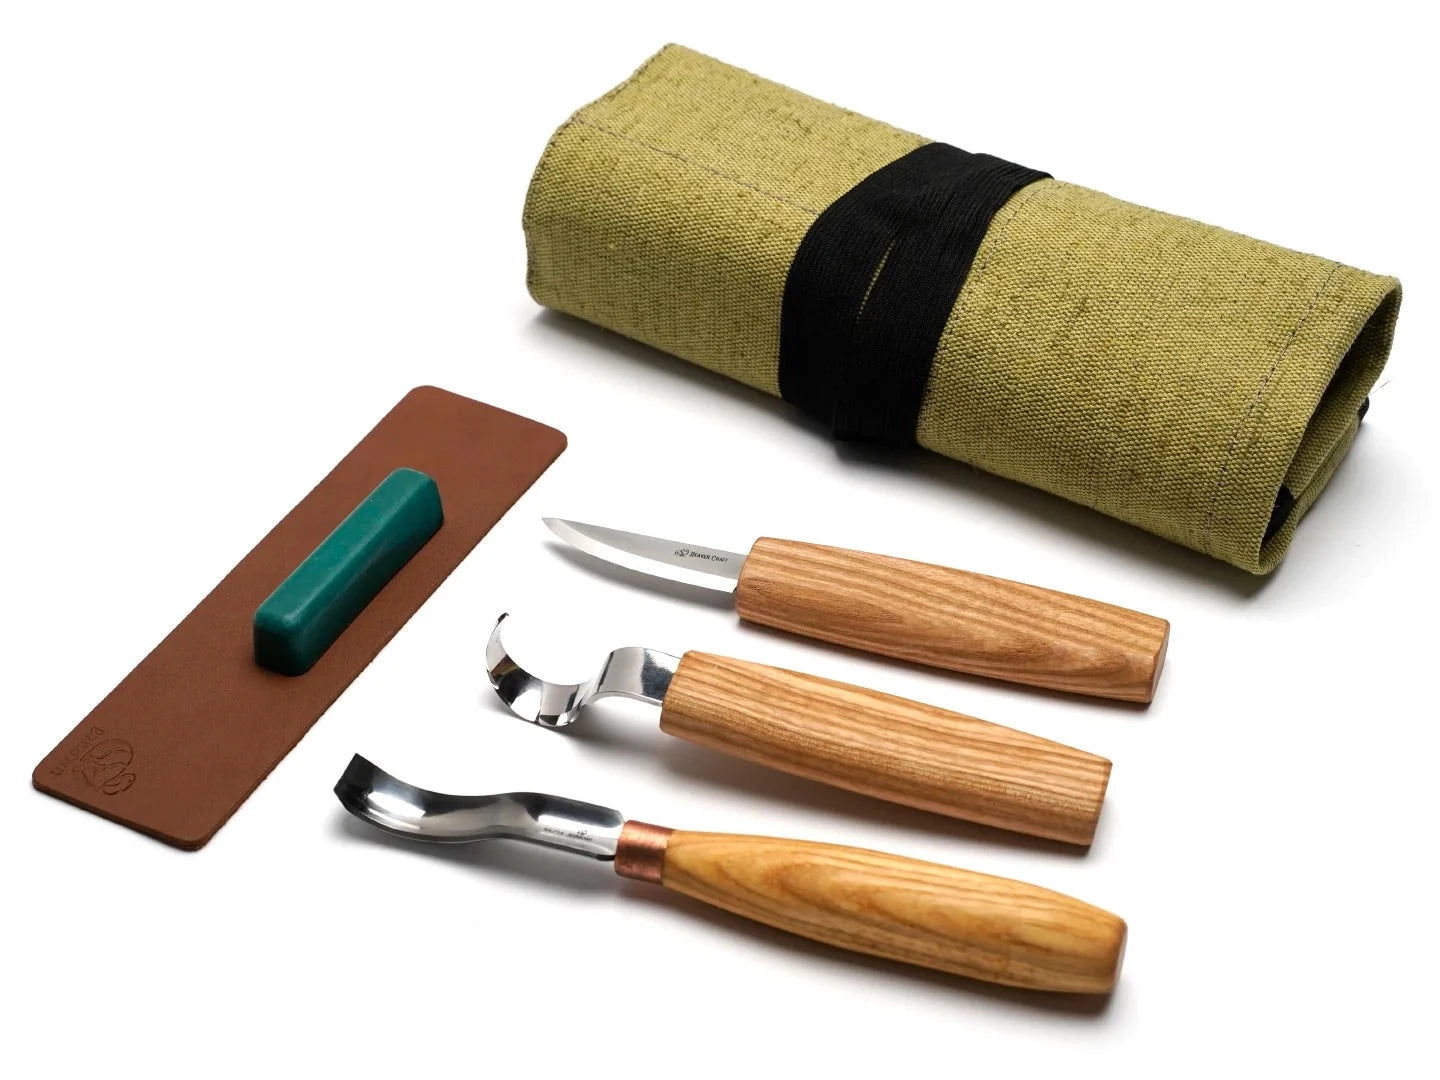 Professional wood carving set 3 tools with stropping accessories